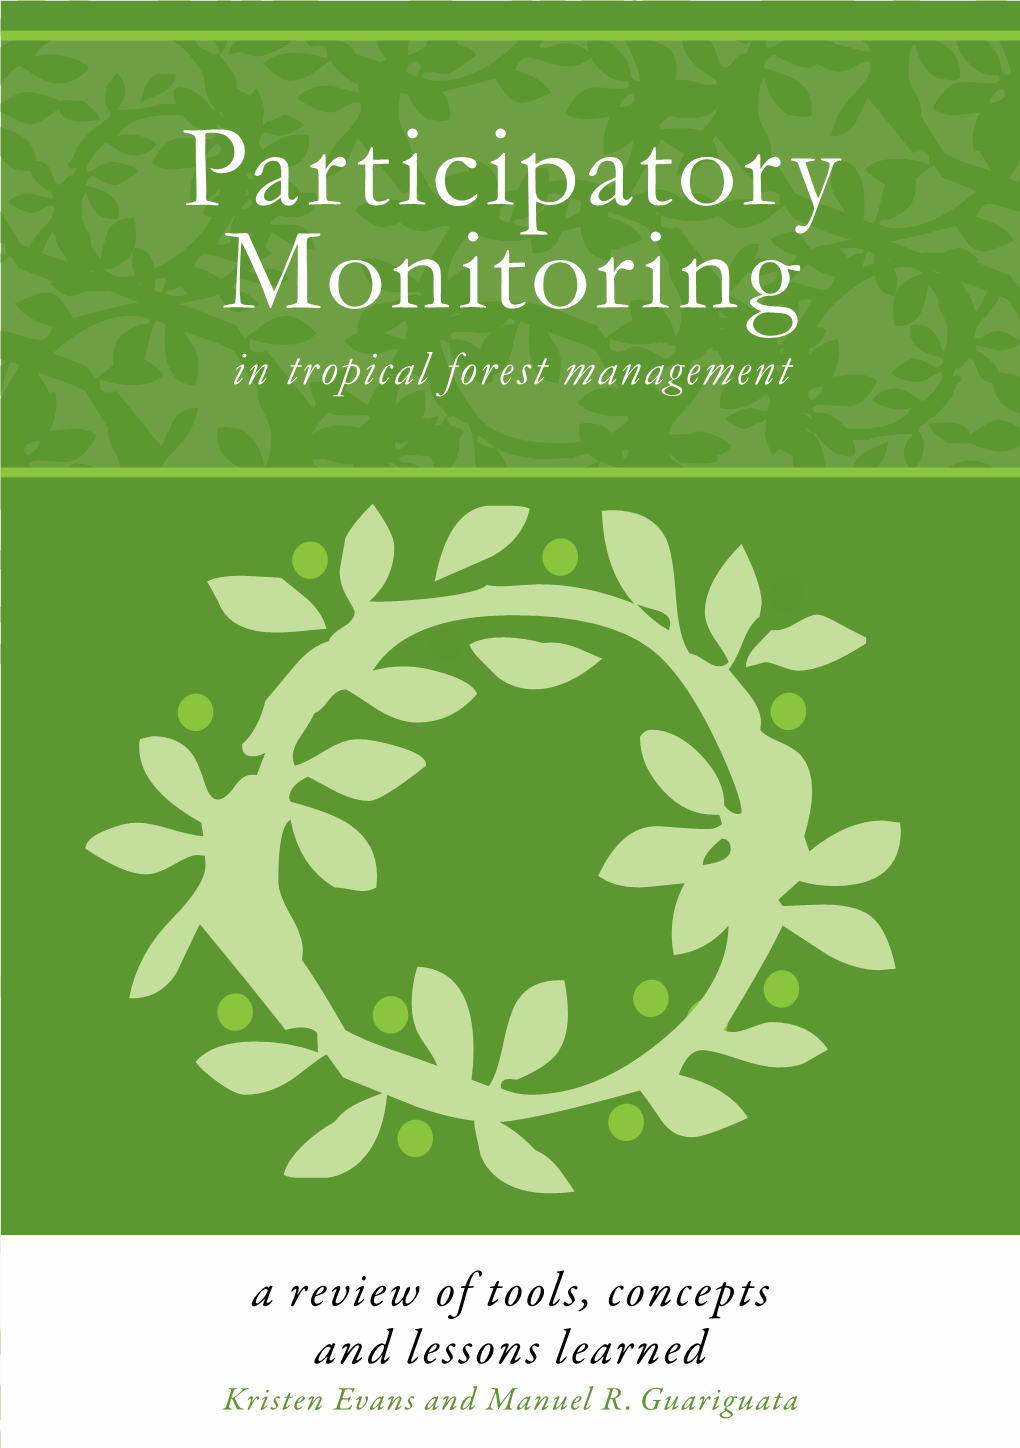 Participatory Monitoring in Tropical Forest Management